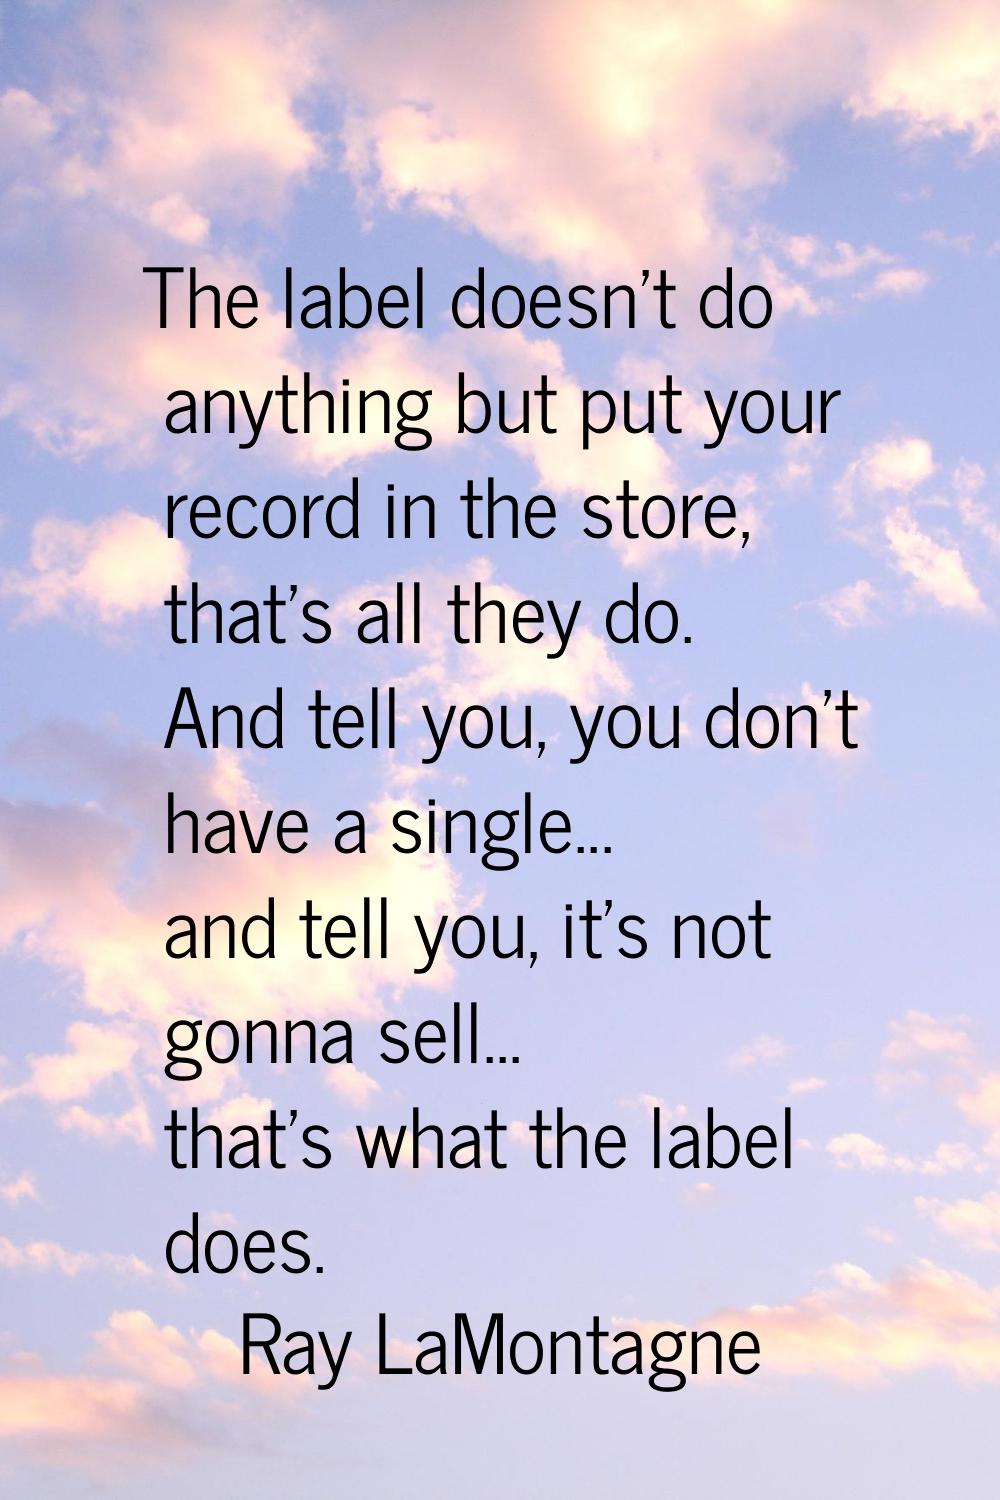 The label doesn't do anything but put your record in the store, that's all they do. And tell you, y